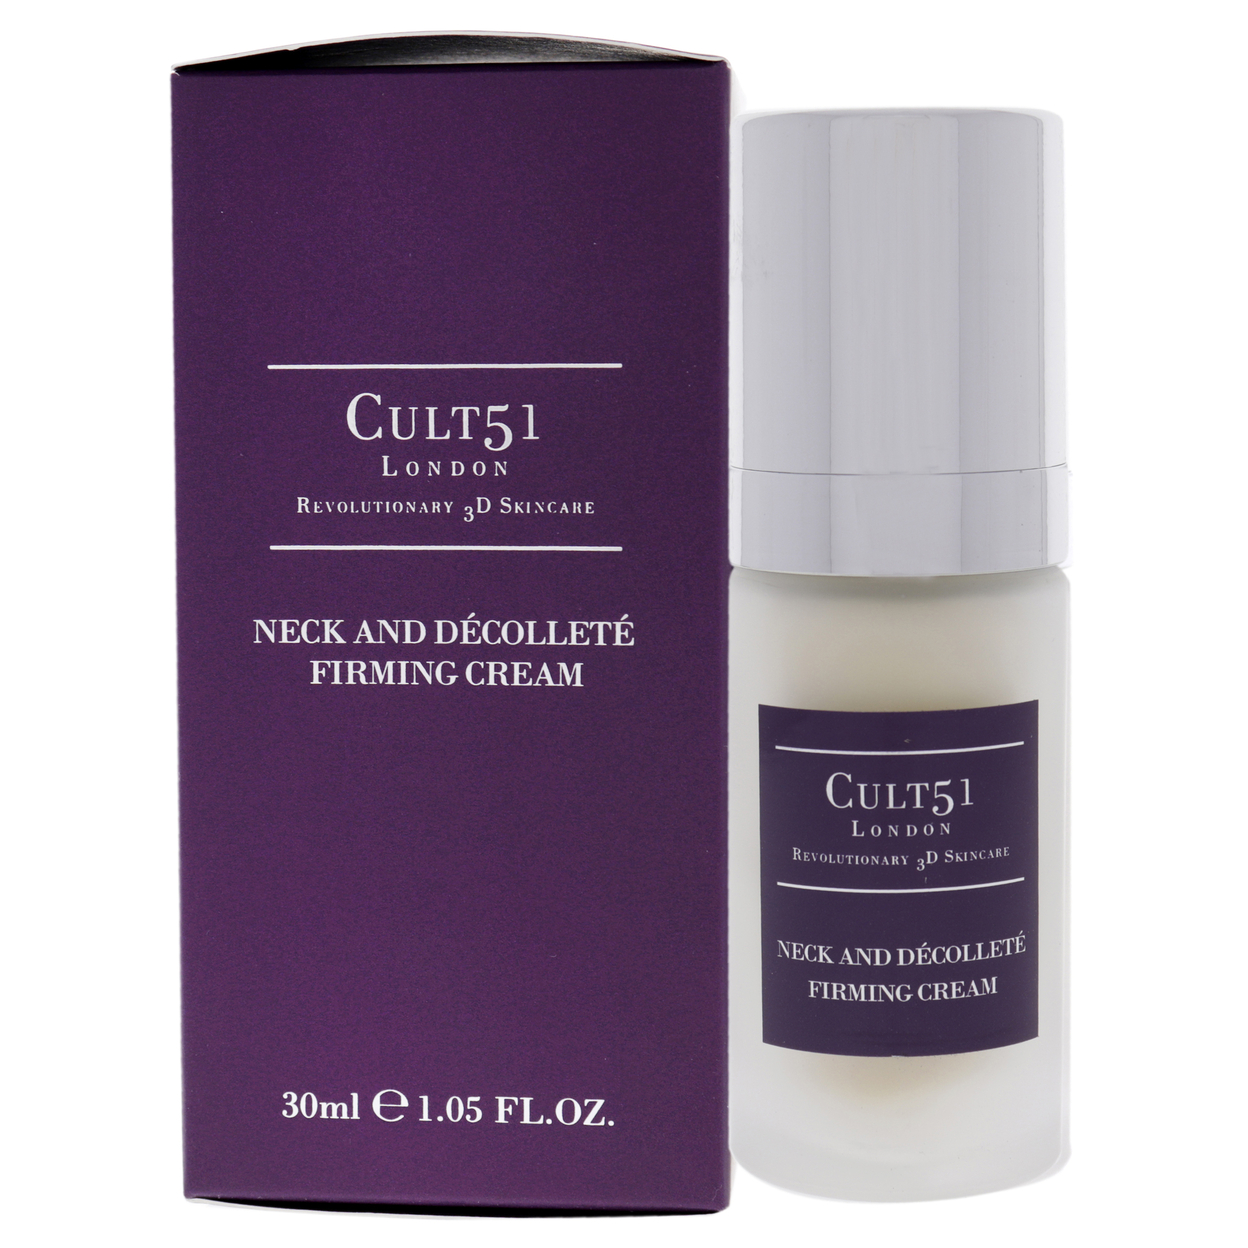 Cult51 Neck And Decollete Firming Cream 1.05 Oz